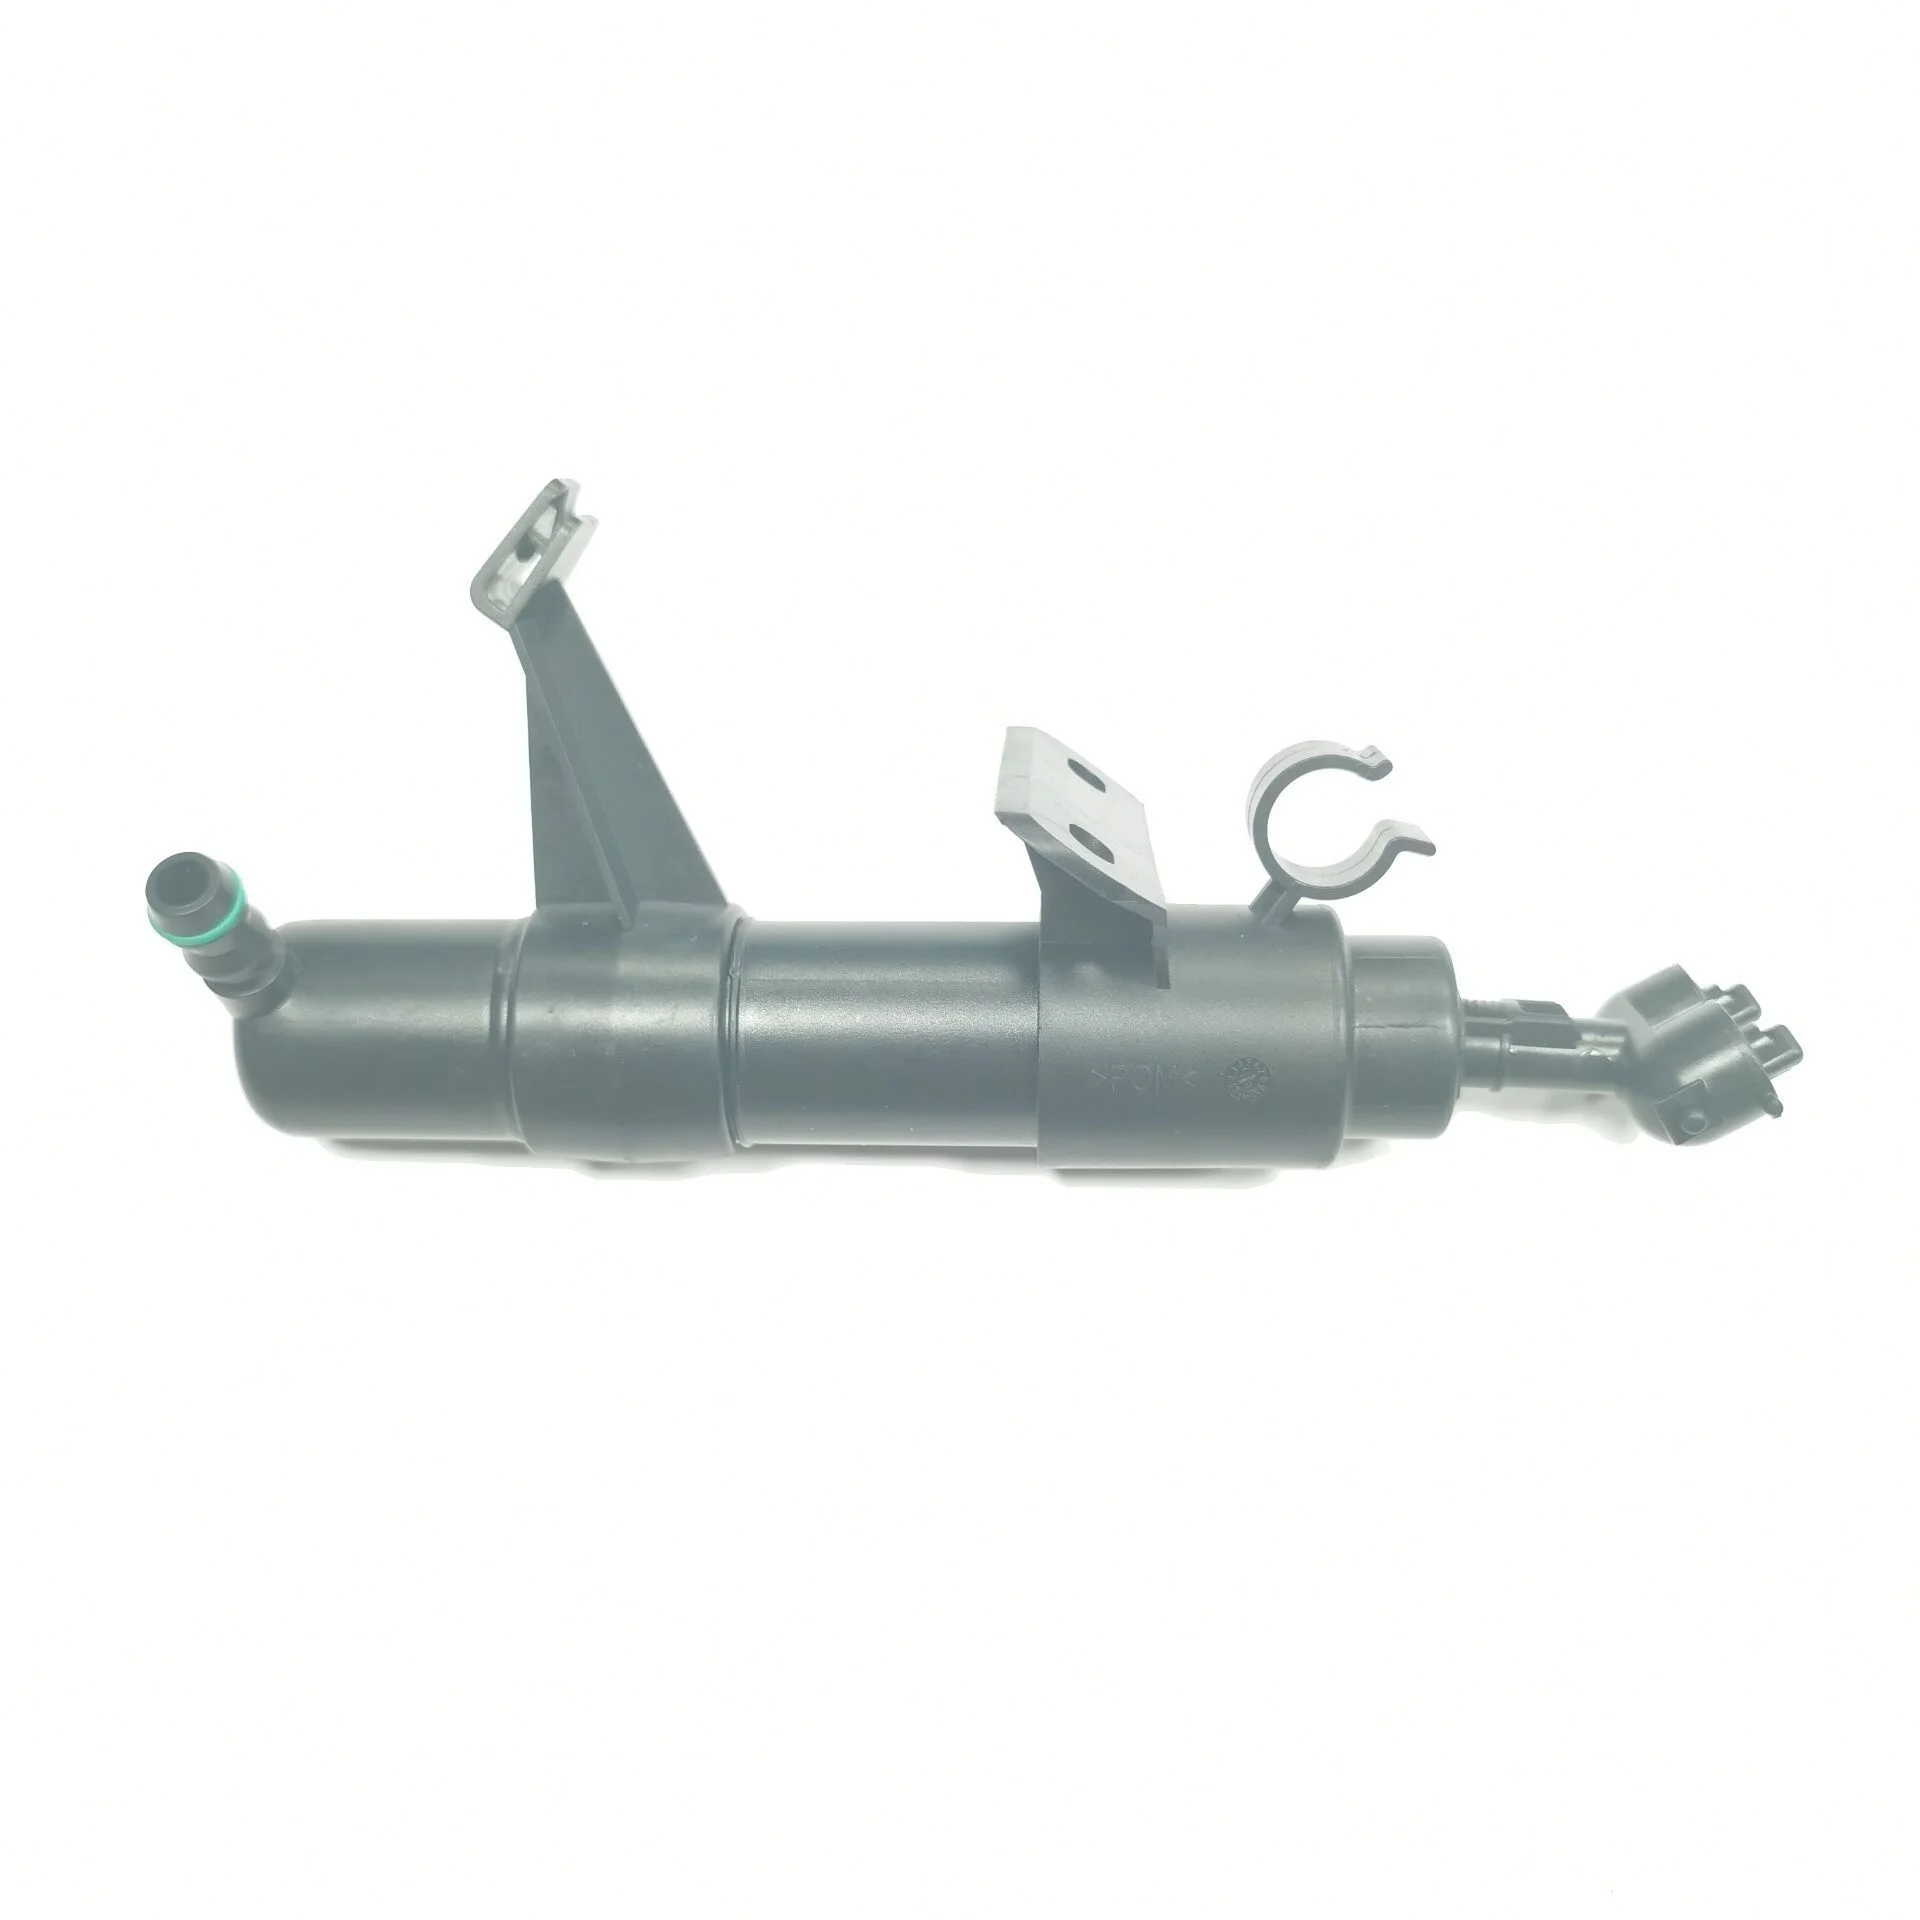 

It Is Suitable for Vw Touareg 2007-2010 Headlight Front Bar Spray Gun 7l6 955 978 a / 979, Left and Right